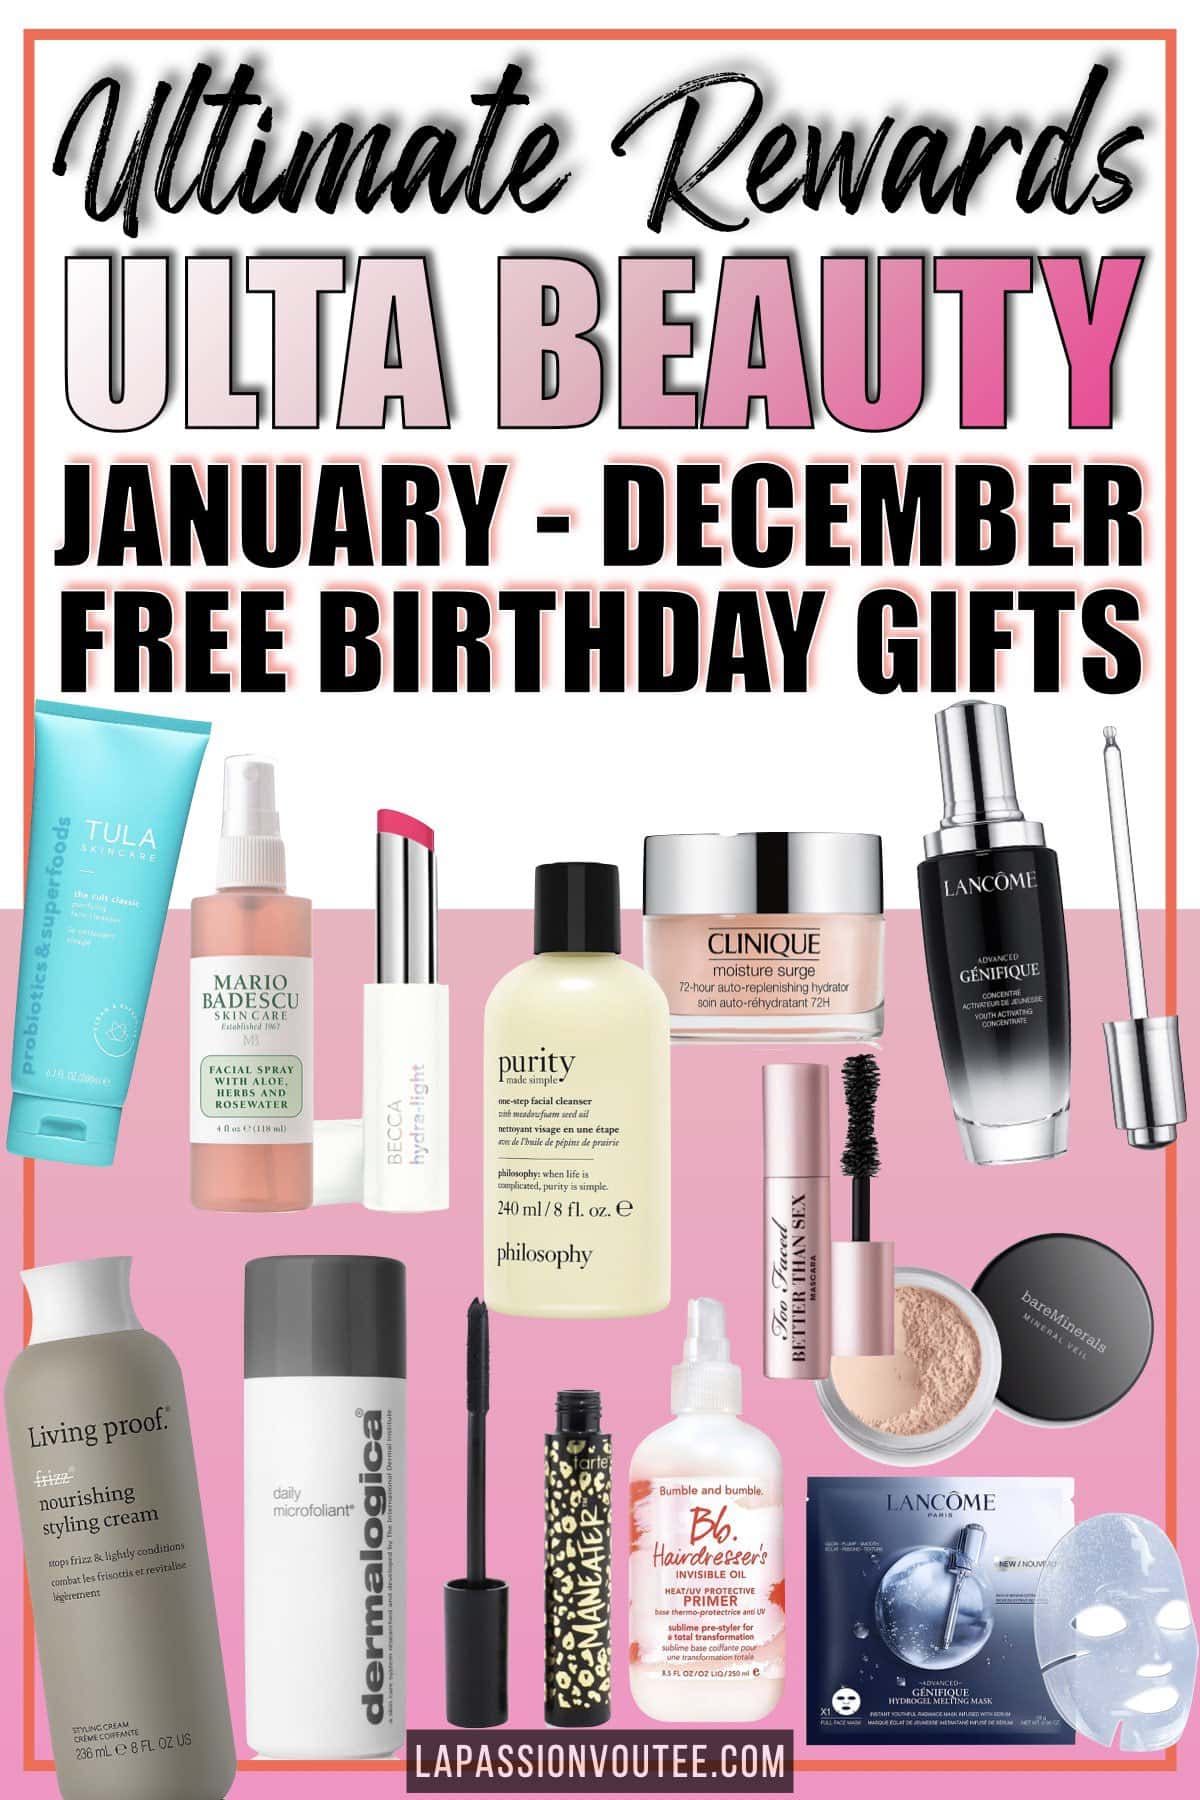 Ultimate Rewards 2021 January to December Birthday Gifts